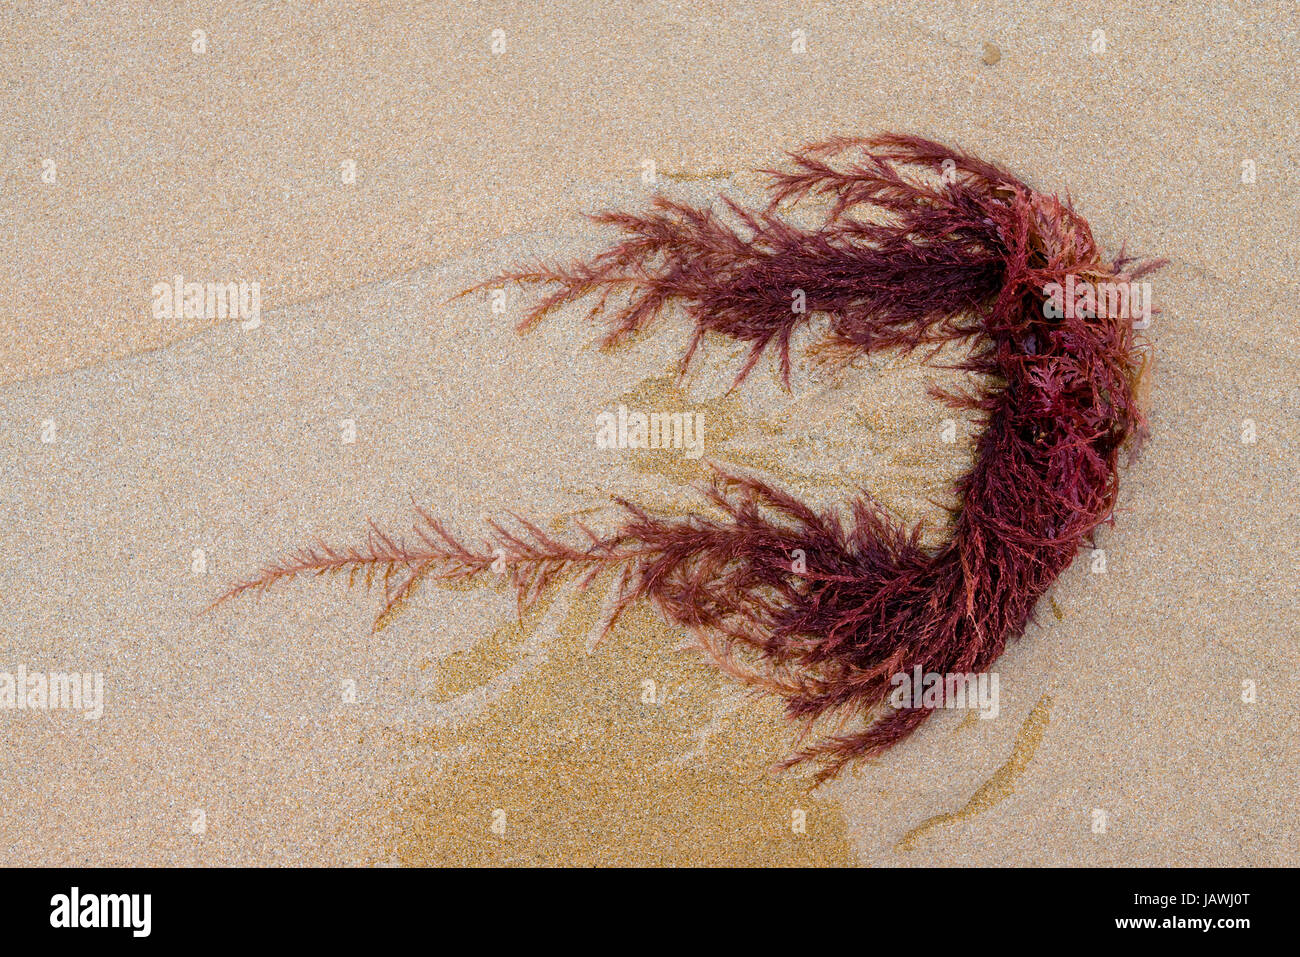 Bright burgundy seaweed deposited onto the beach at low tide. Stock Photo